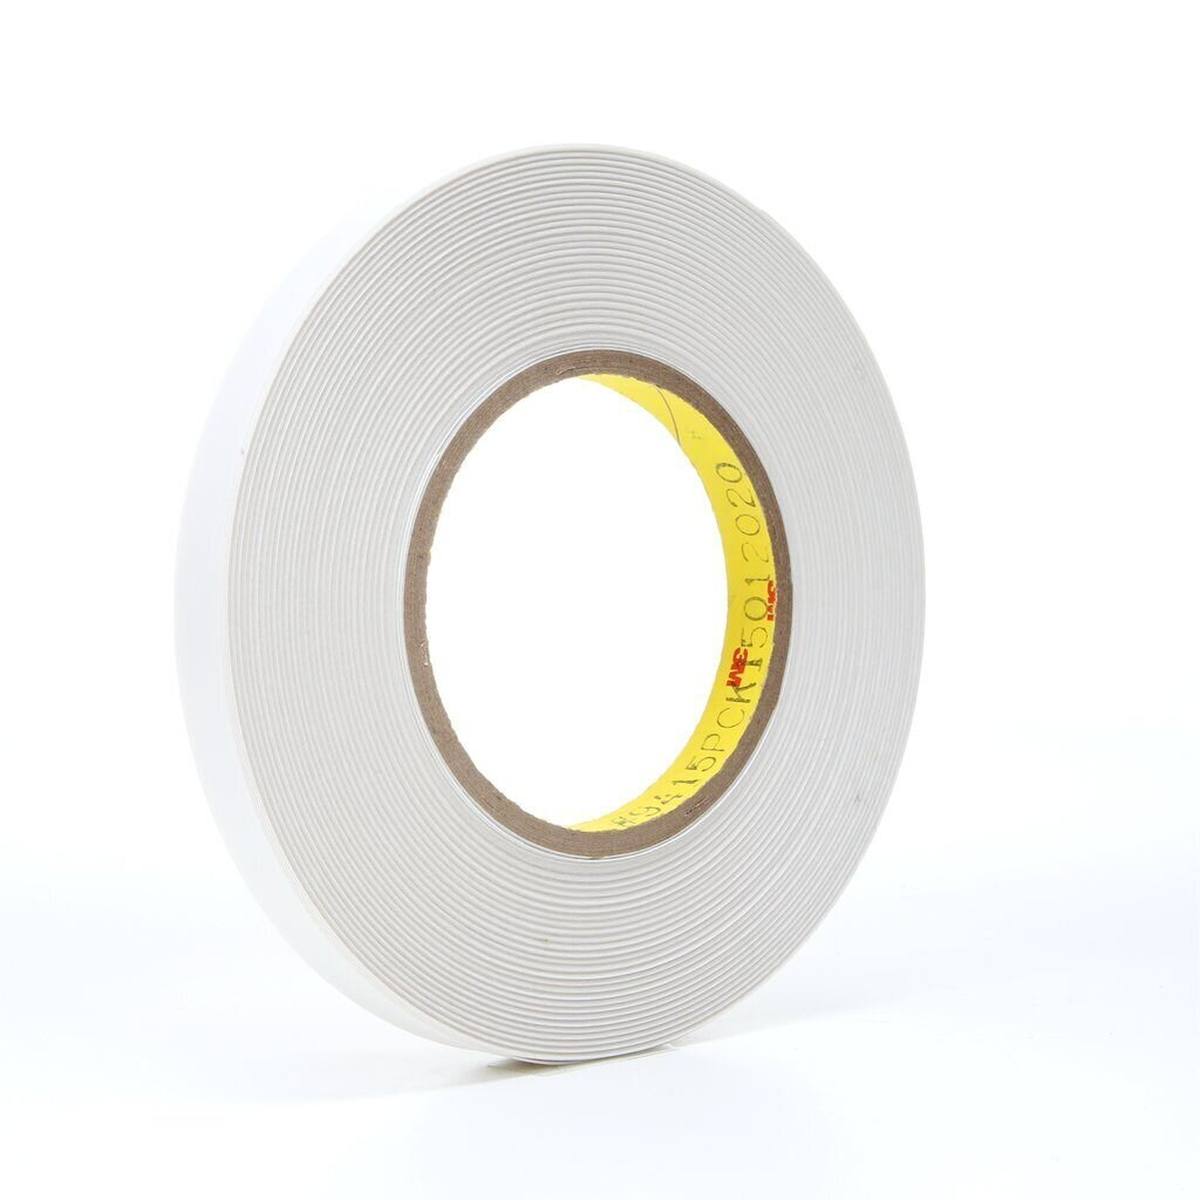 3M Double-sided adhesive tape with polyester backing 9415PC, translucent, 19 mm x 66 m, 0.05 mm